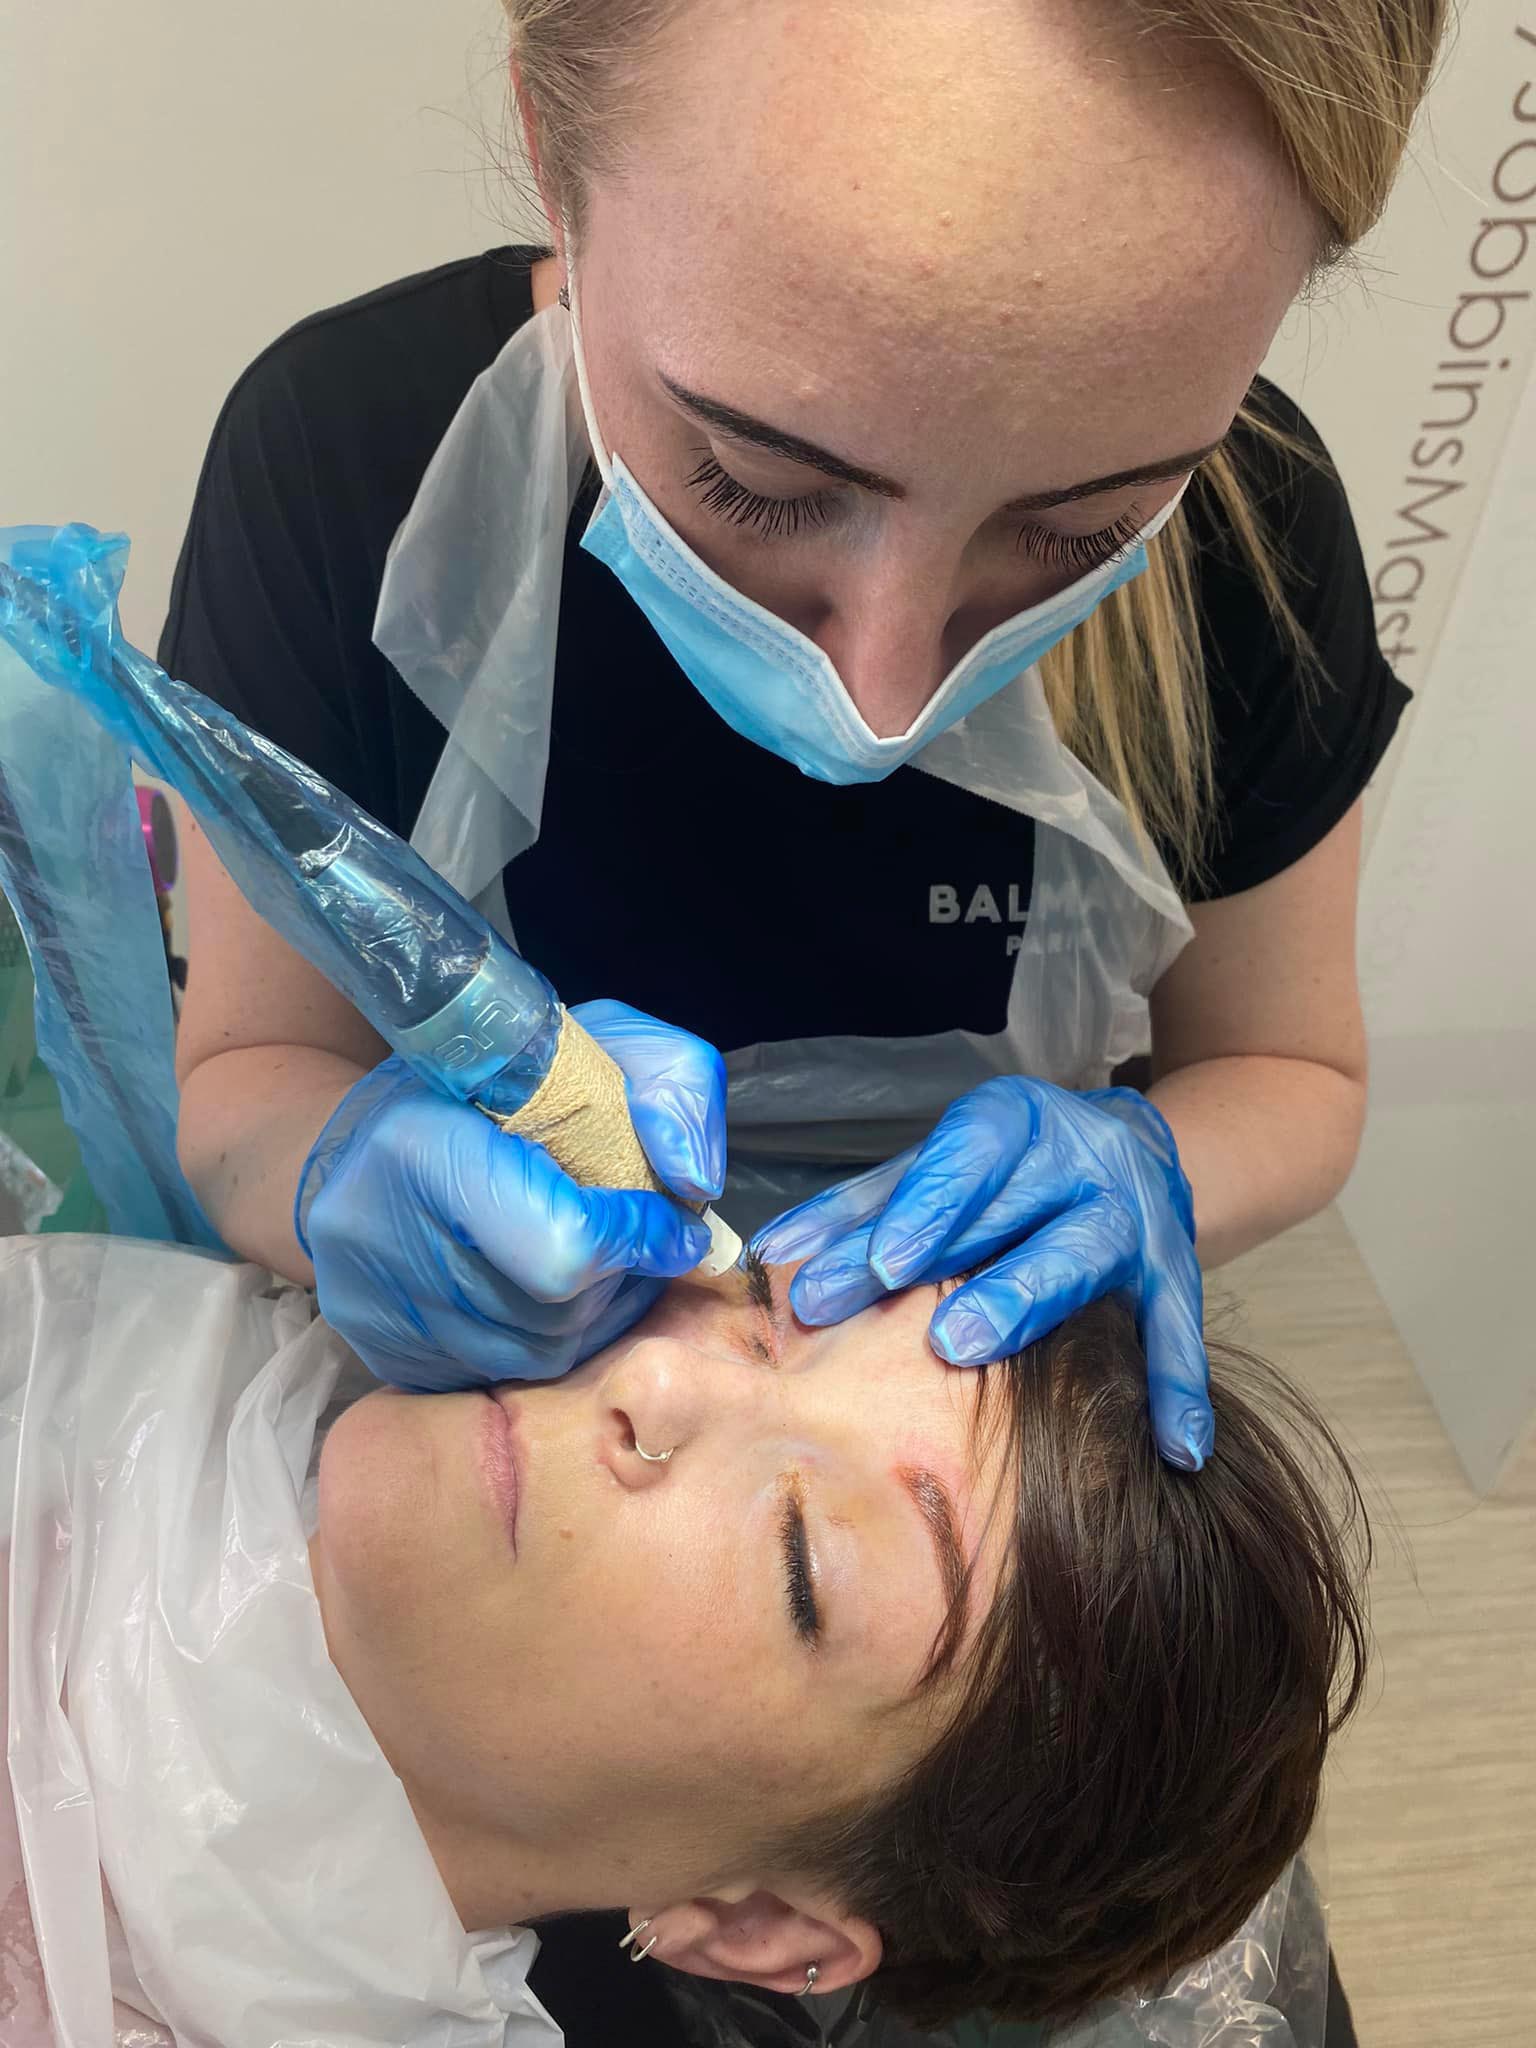 Danielle performing permanent eyeliner treatments on her client during training